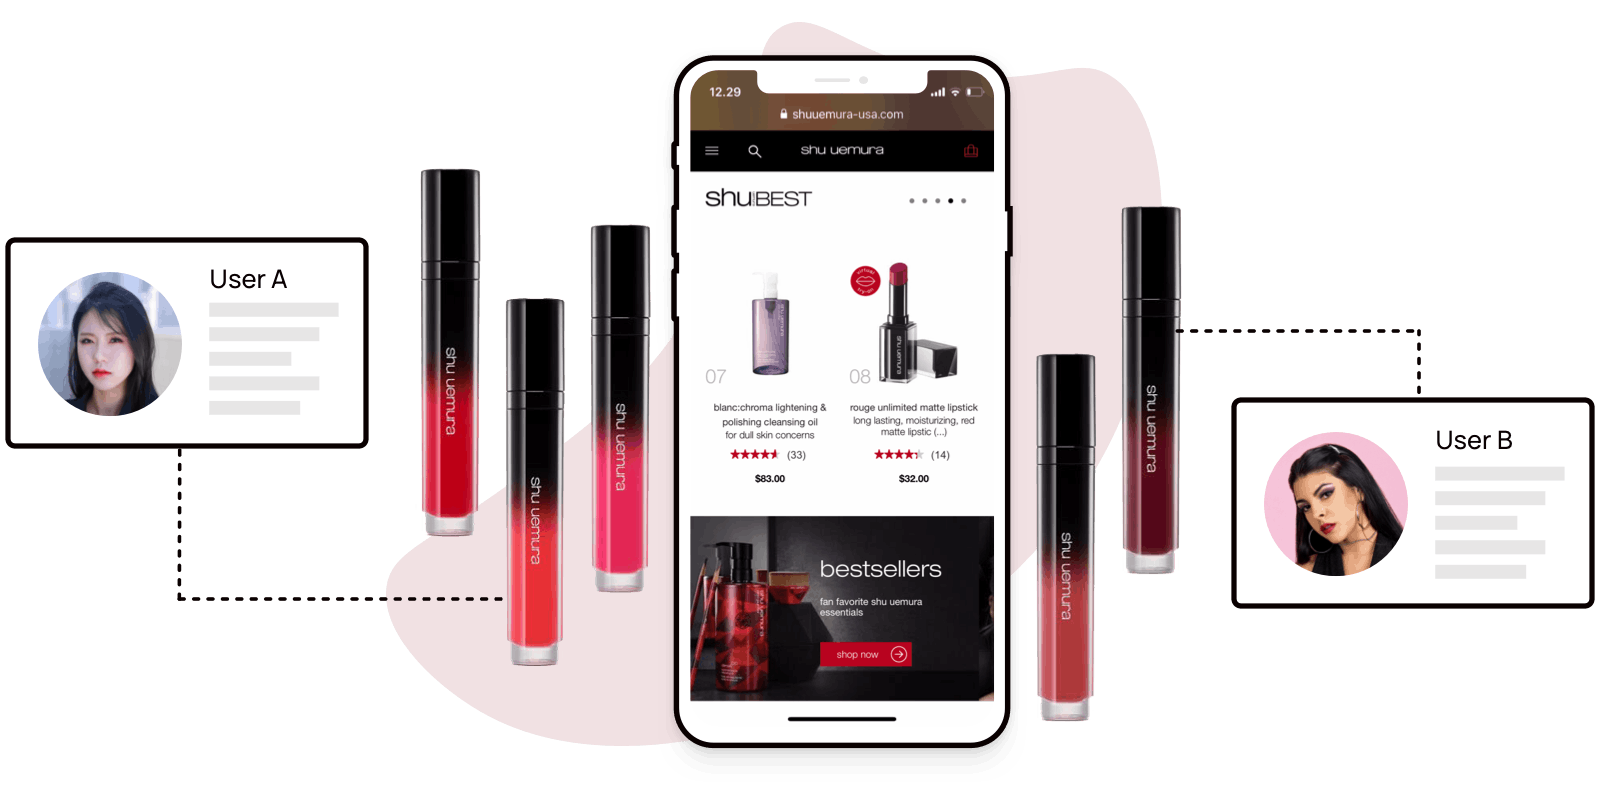 Rosetta AI provides personalized recommendation messages to remind customers to buy the products they love